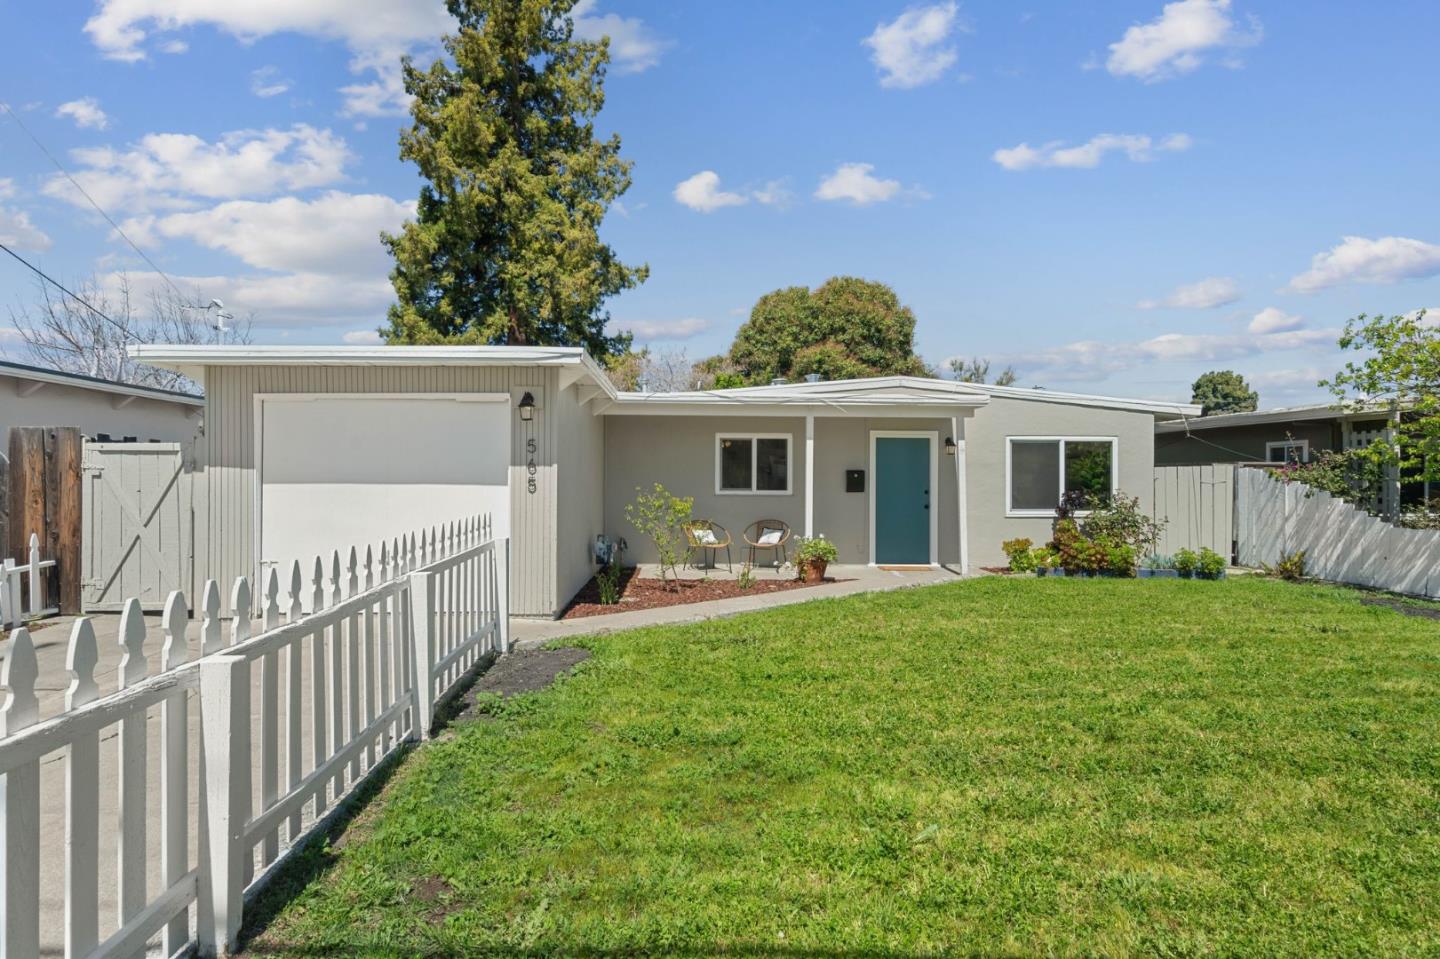 Photo of 565 Cypress Ave in Sunnyvale, CA